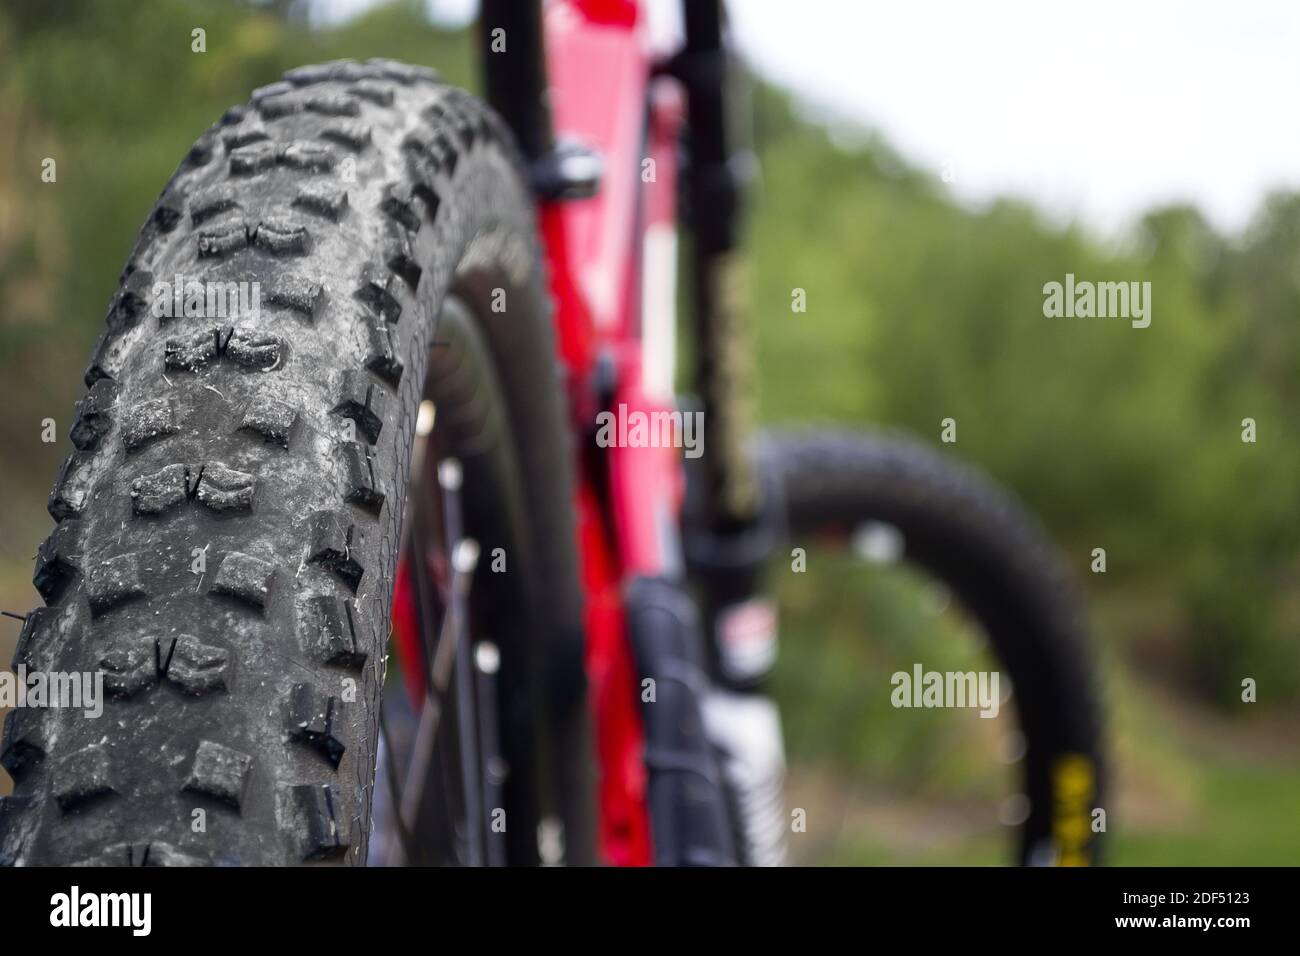 Ctm Bikes High Resolution Stock Photography and Images - Alamy